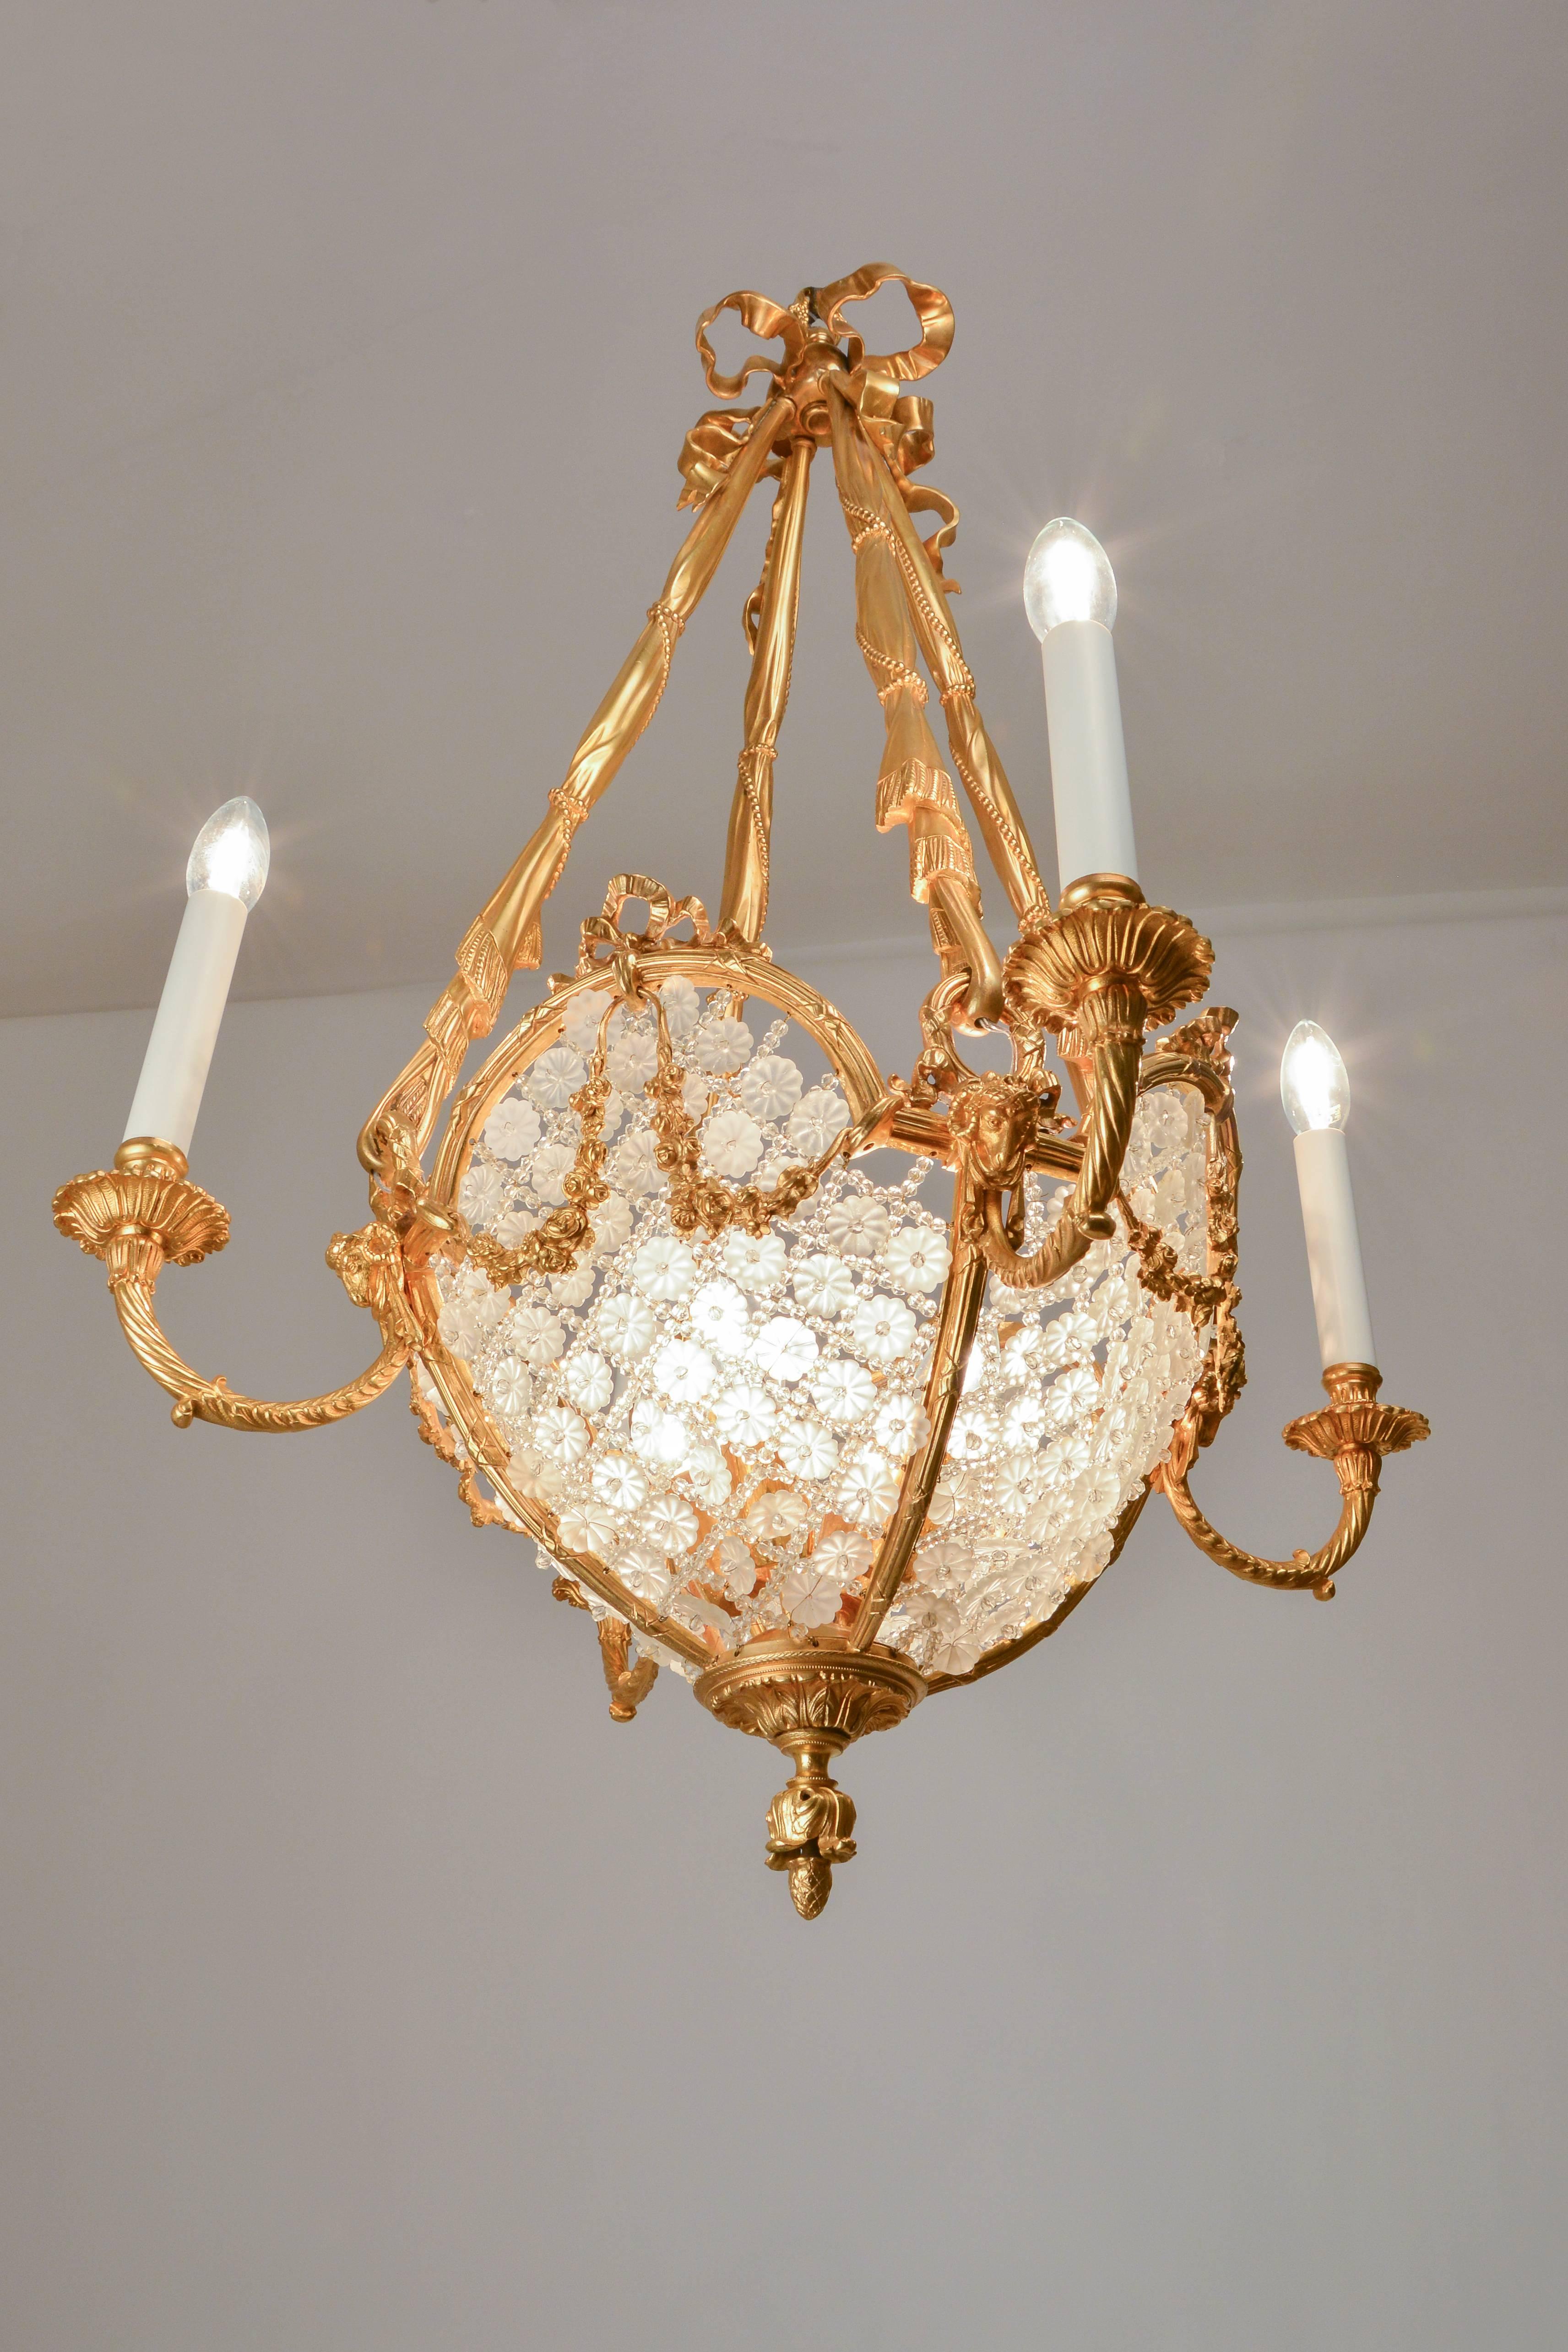 This is realistically cast pendant lamp is a masterpiece of French artisans. The expertly cast and refined suspension realistically depicts a draped scarf with pearl-string details. The body of the pendant spans a delicate mesh of tiny cut pearls